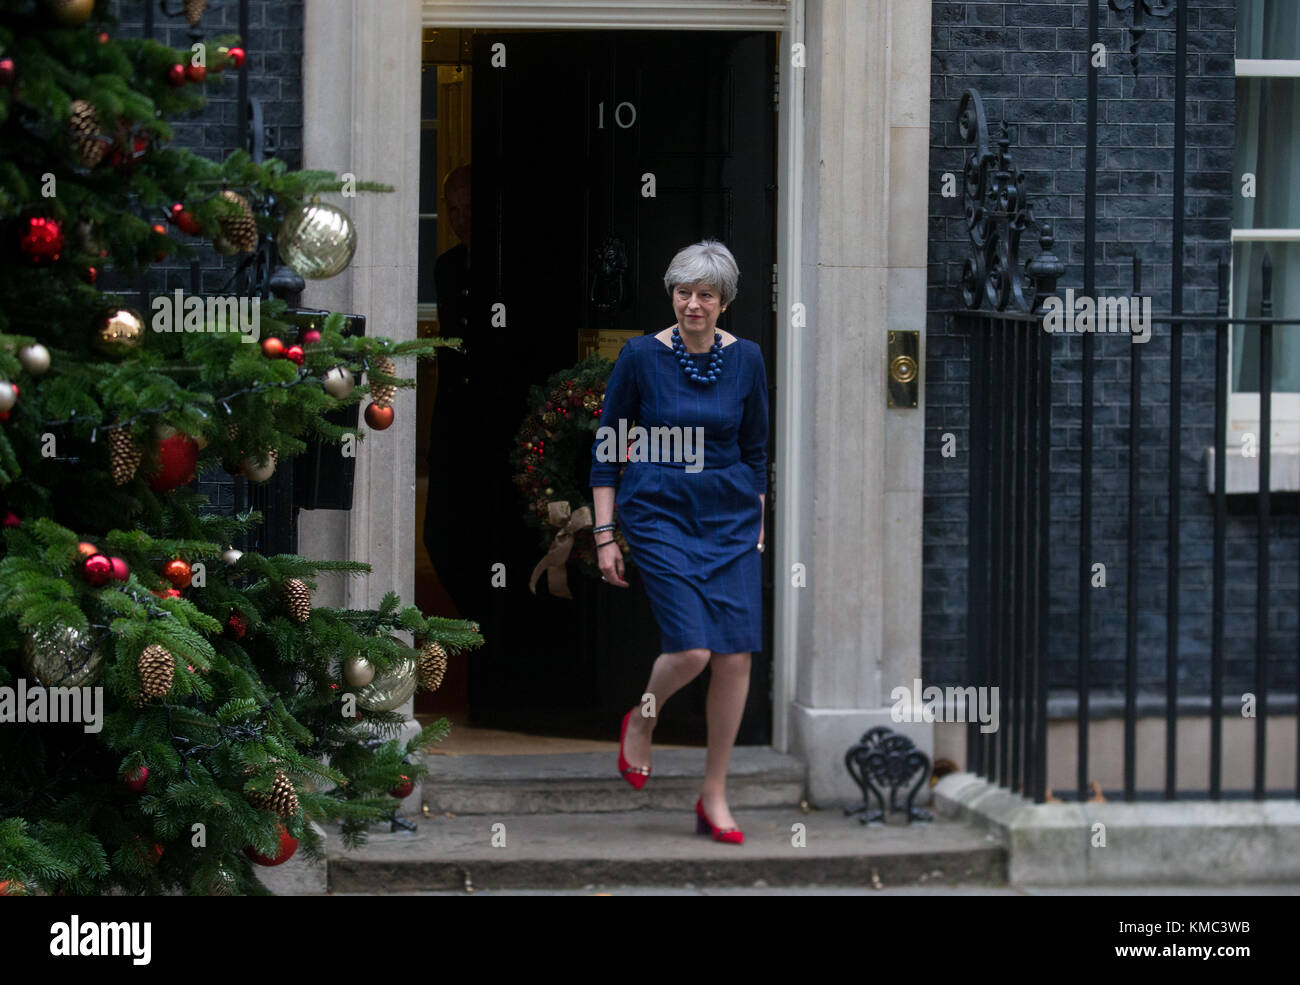 British Prime Minister, Theresa May, leaves 10 Downing Street to meet Mariano Rajoy, Prime Minister of Spain for talks at 10 Downing Street Stock Photo